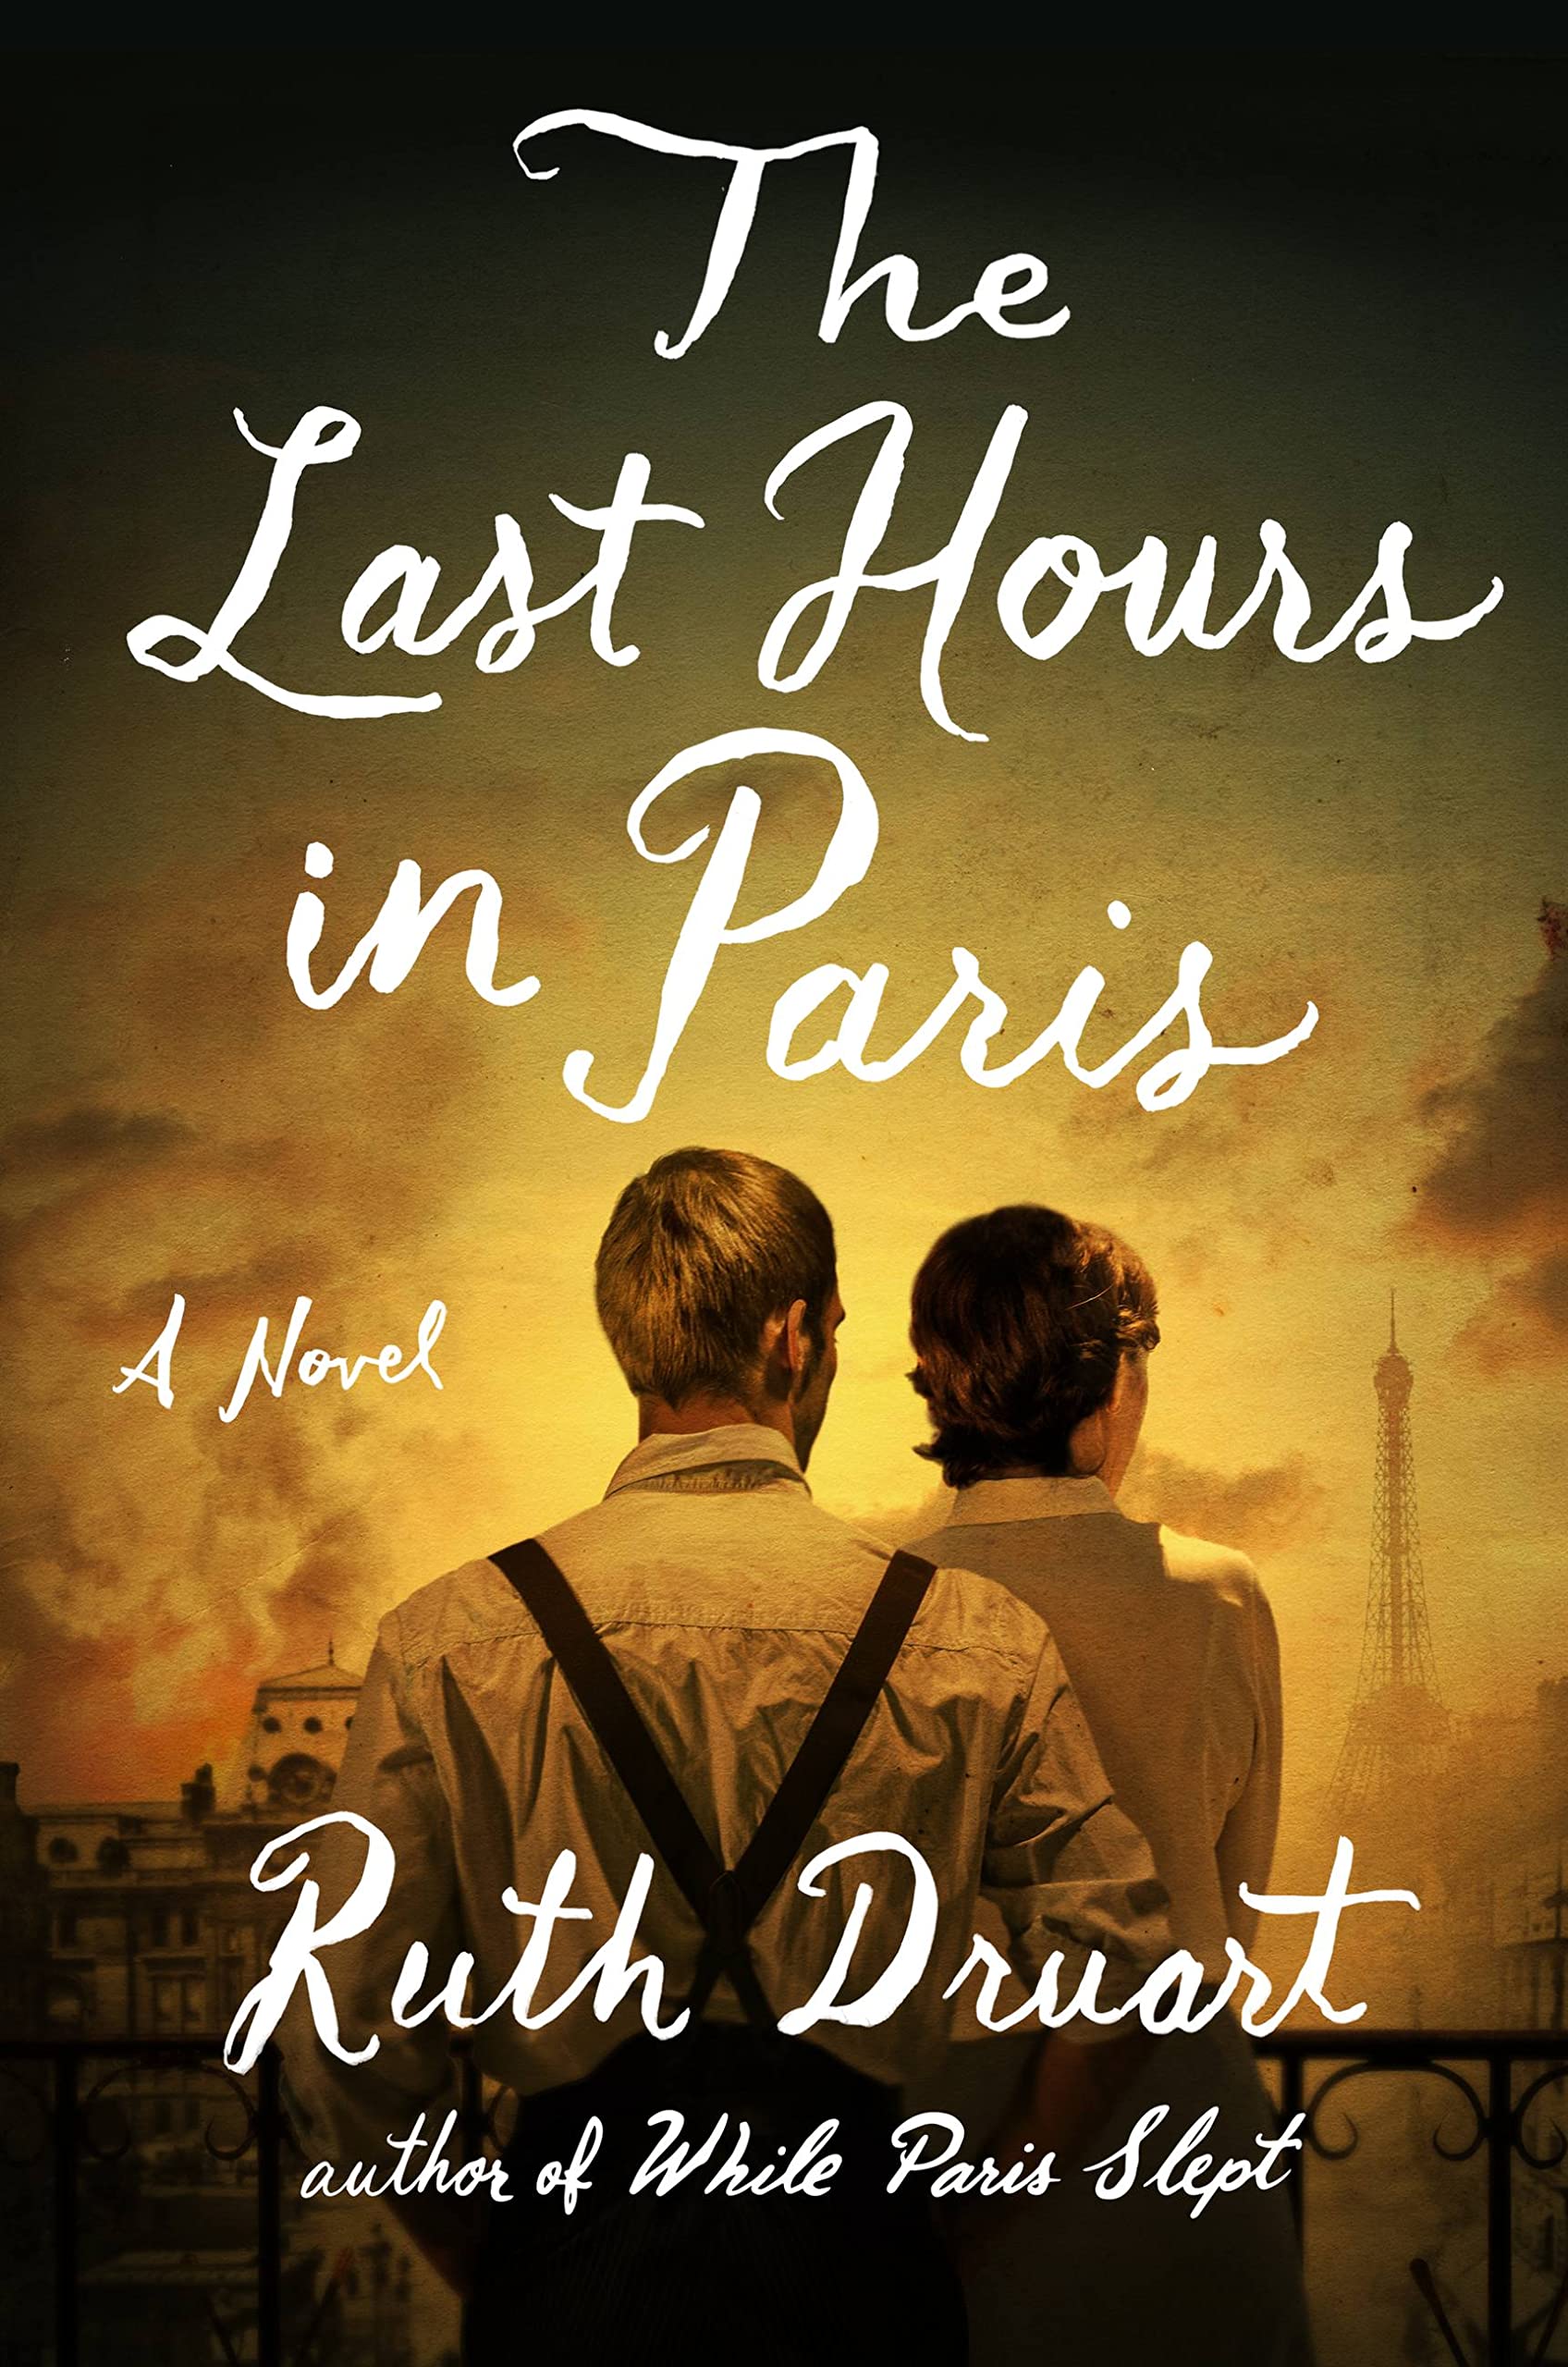 Image for "The Last Hours in Paris"